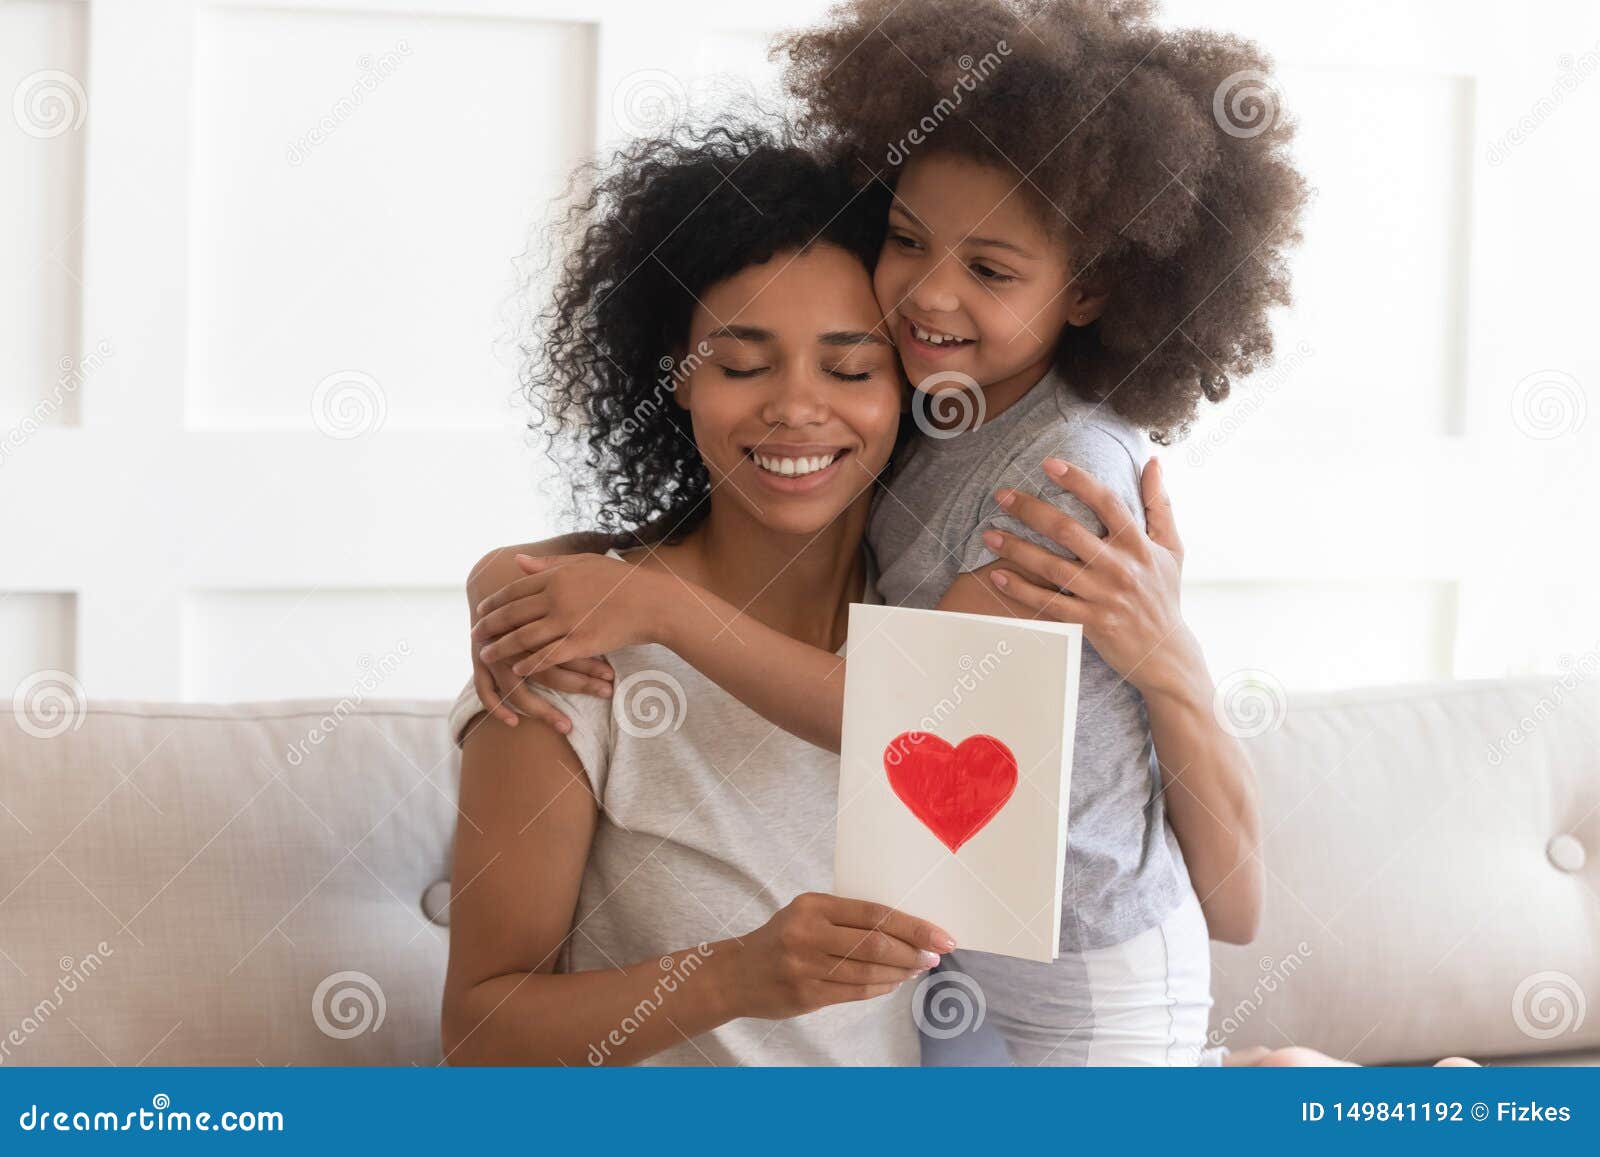 african mum hugging daughter holding greeting card on mothers day